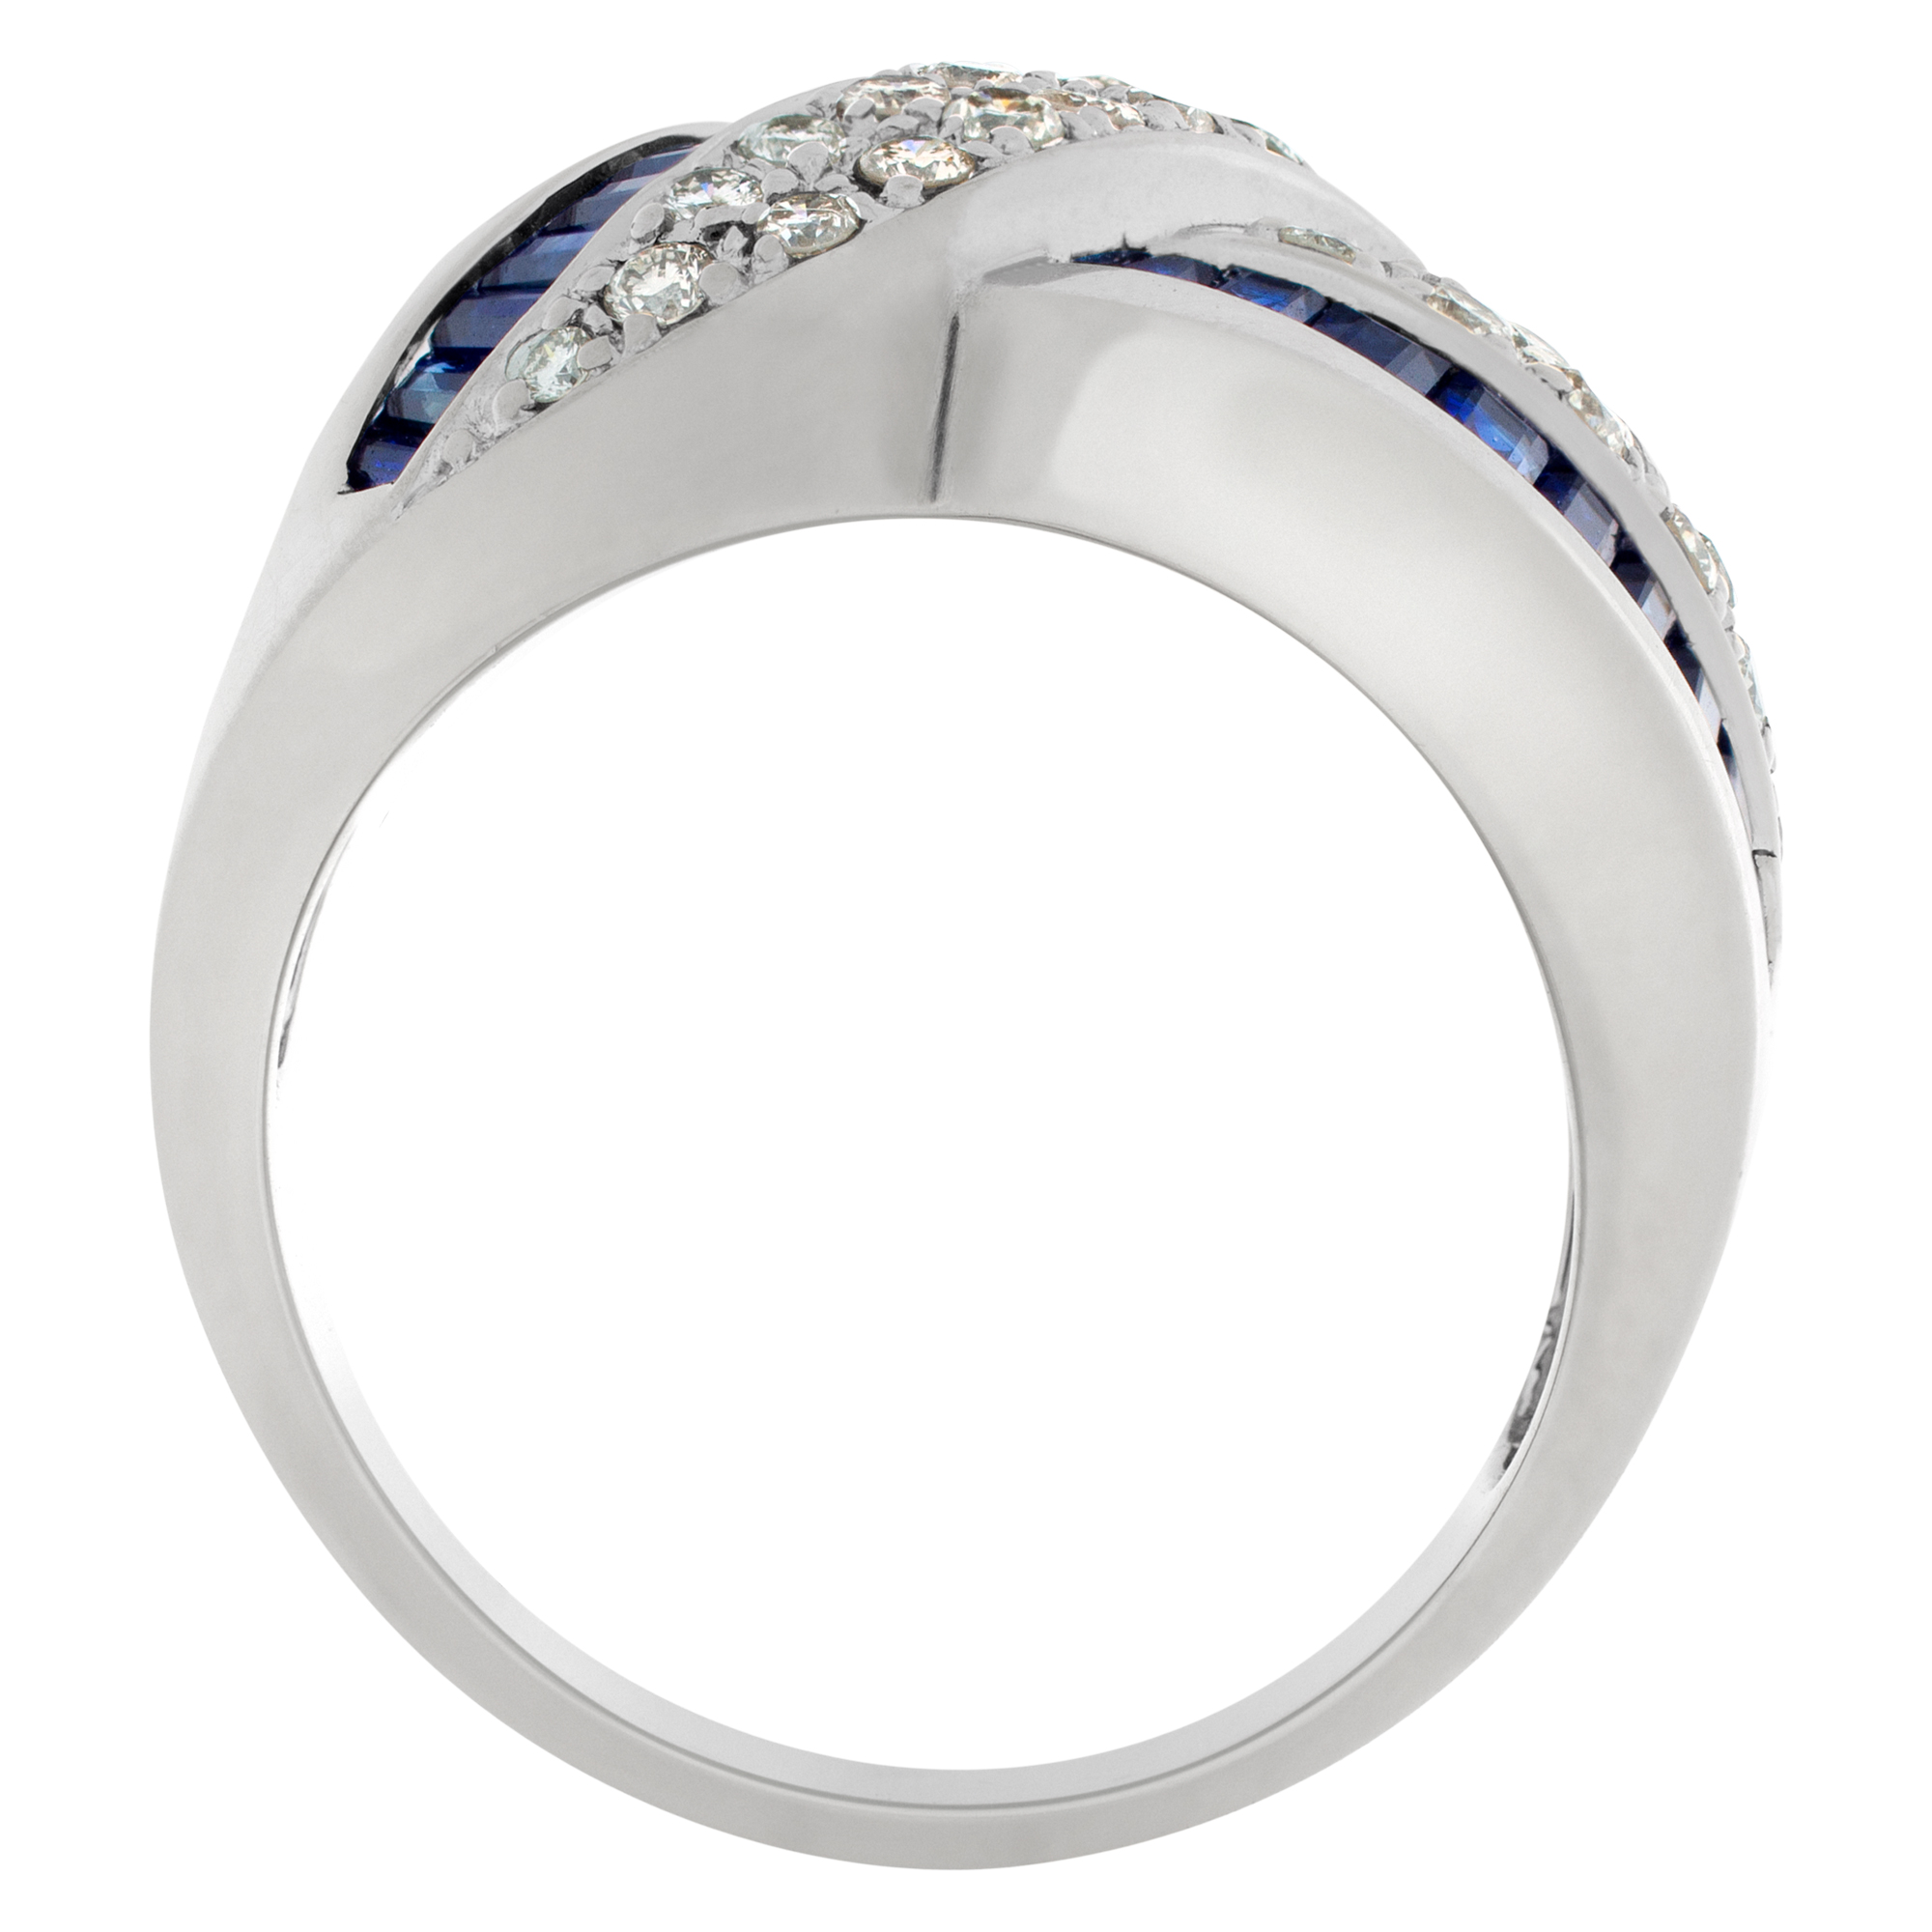 Criss-Cross sapphire & diamond ring in 14K white gold. Approx 1 carat tapered emerald cut sapphire and 0.75 carat full cut round diamond. image 5